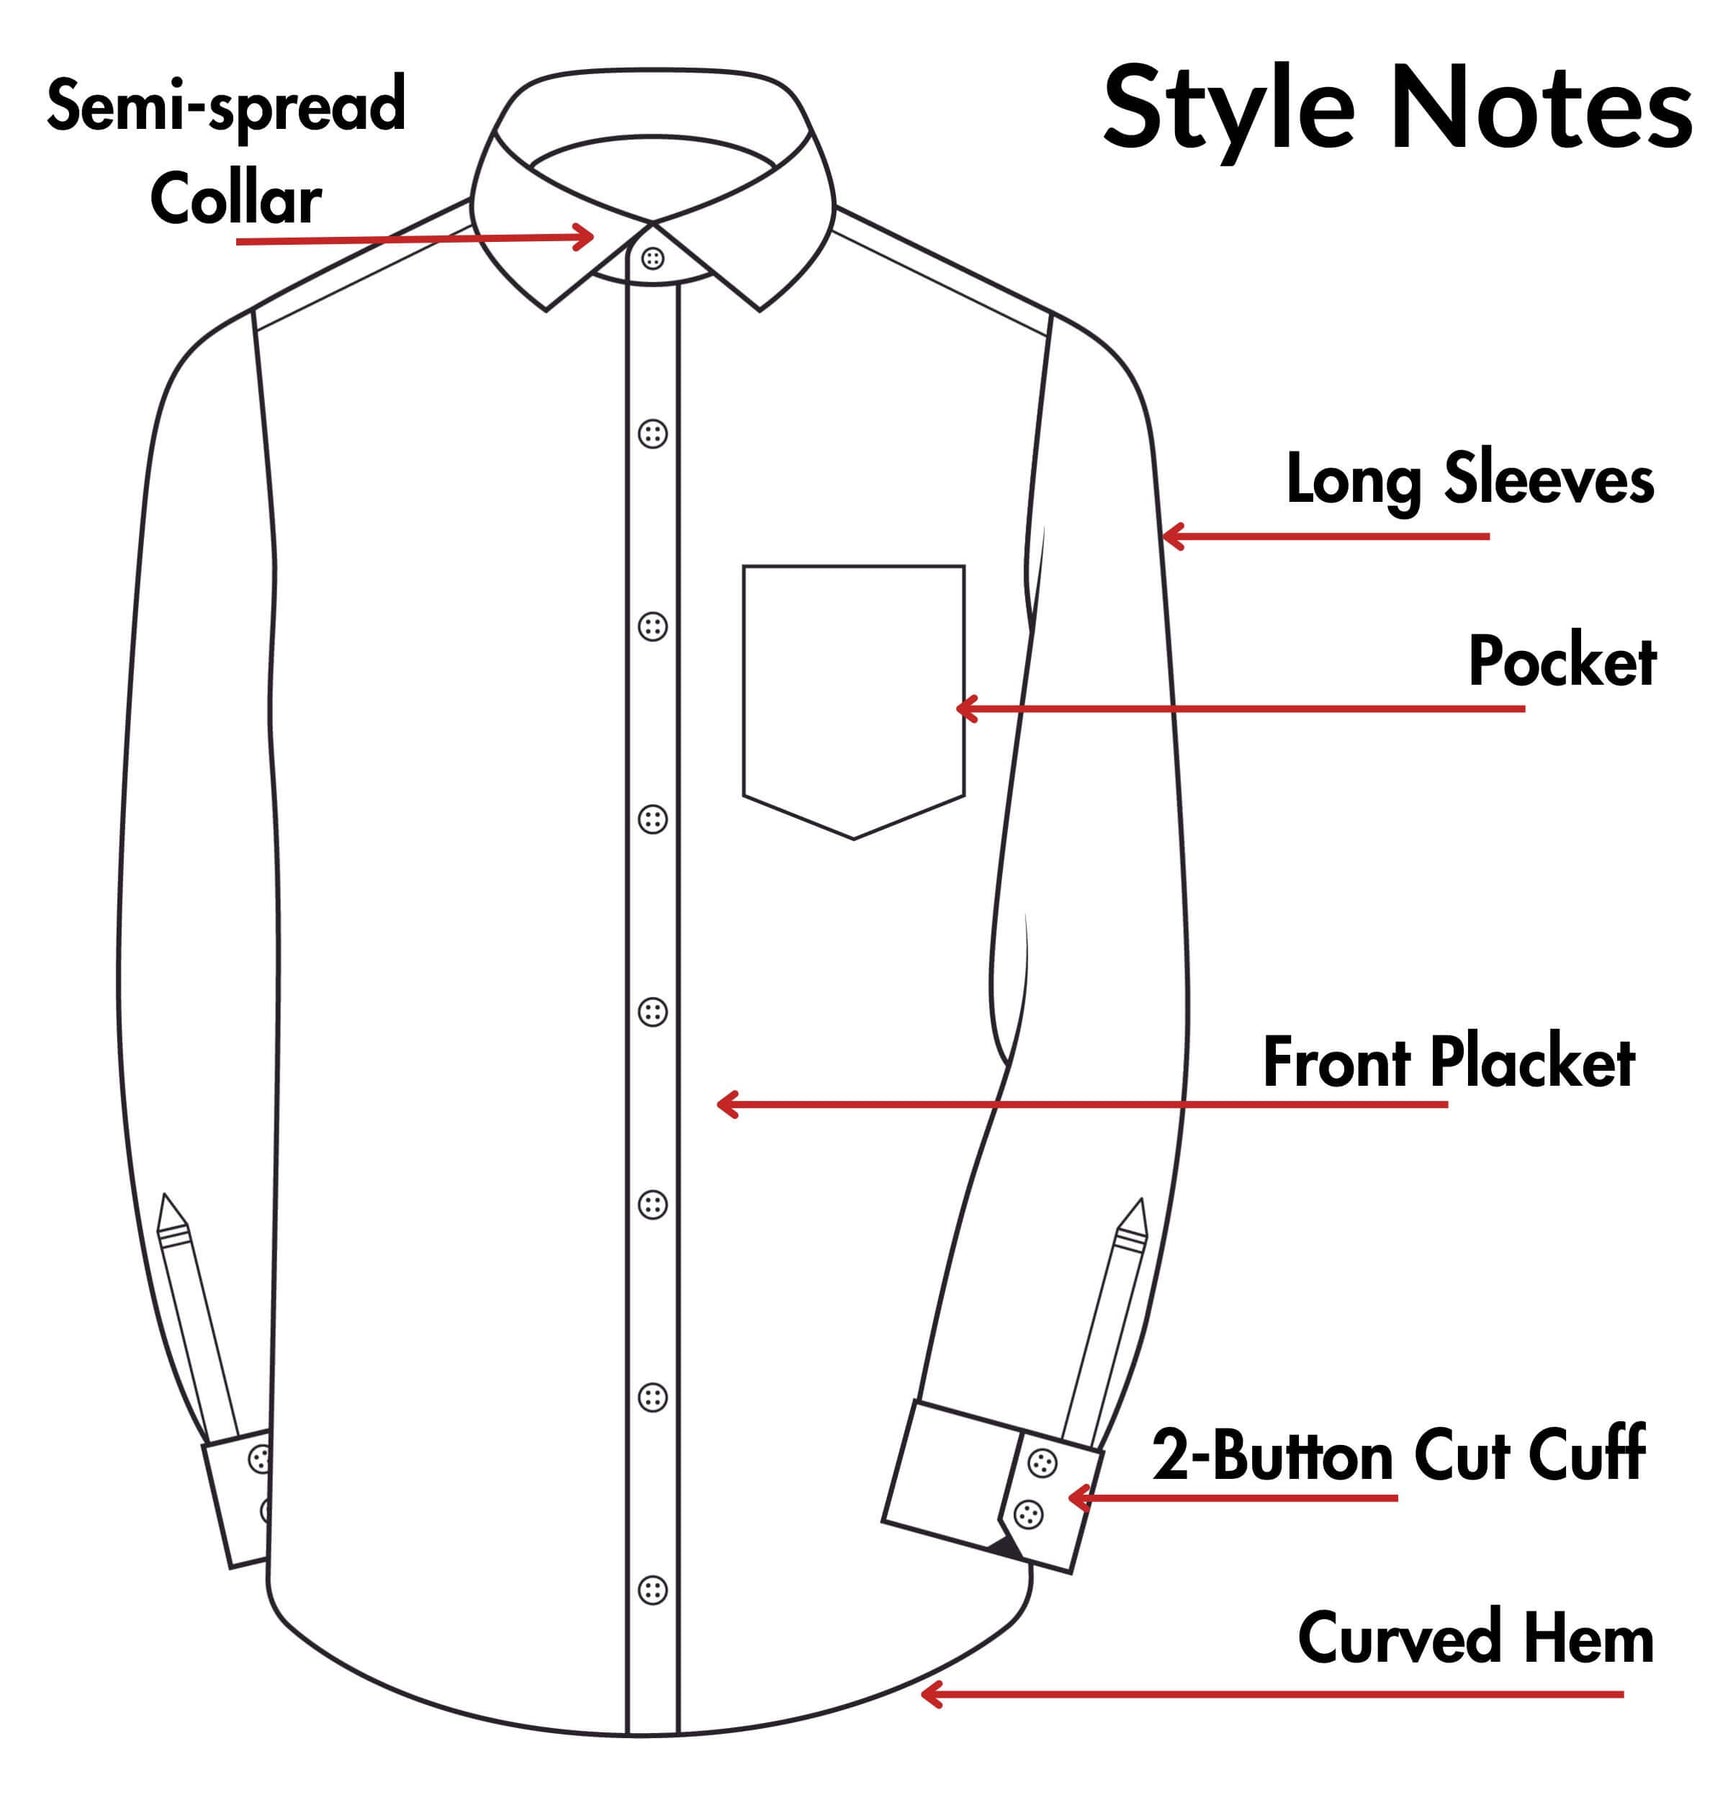 Camp Collar Shirt Style Details